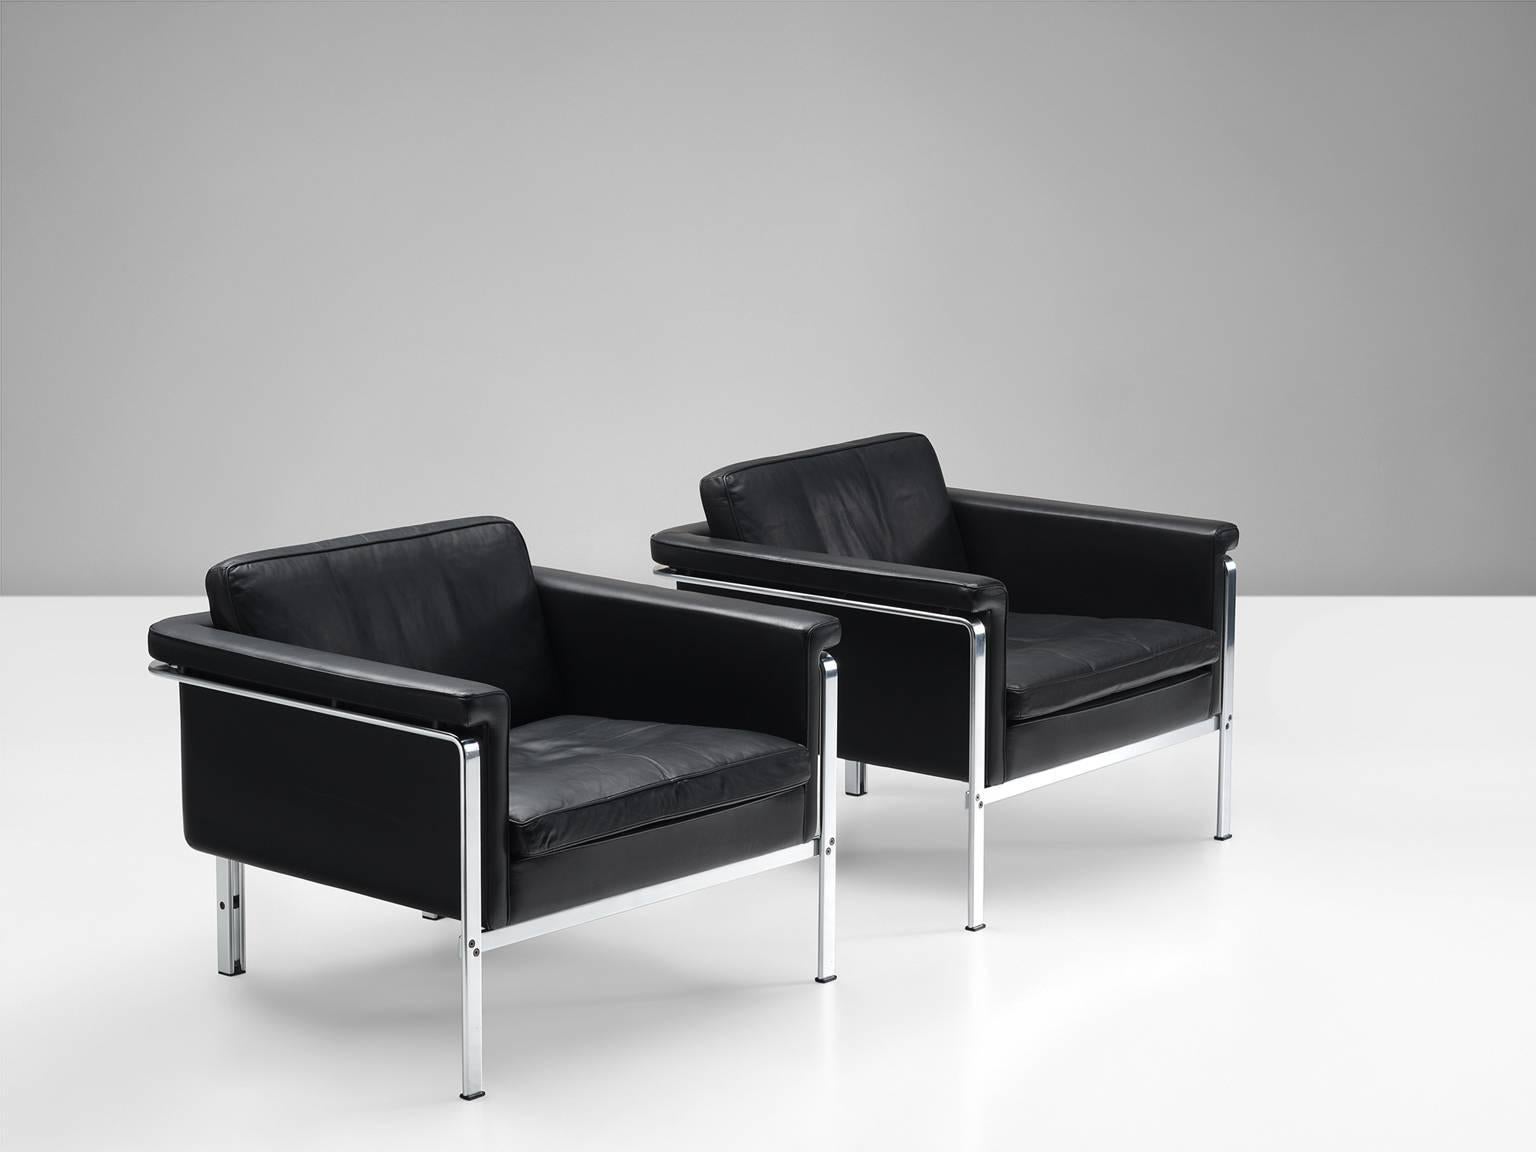 Pair of lounge chairs model 6910, in black leather and steel, by Horst Bruning for Kill International, Germany, 1967.

Set of two lounge chairs in good condition. The design dates from 1967 and the production of these chairs started in the 1970s.